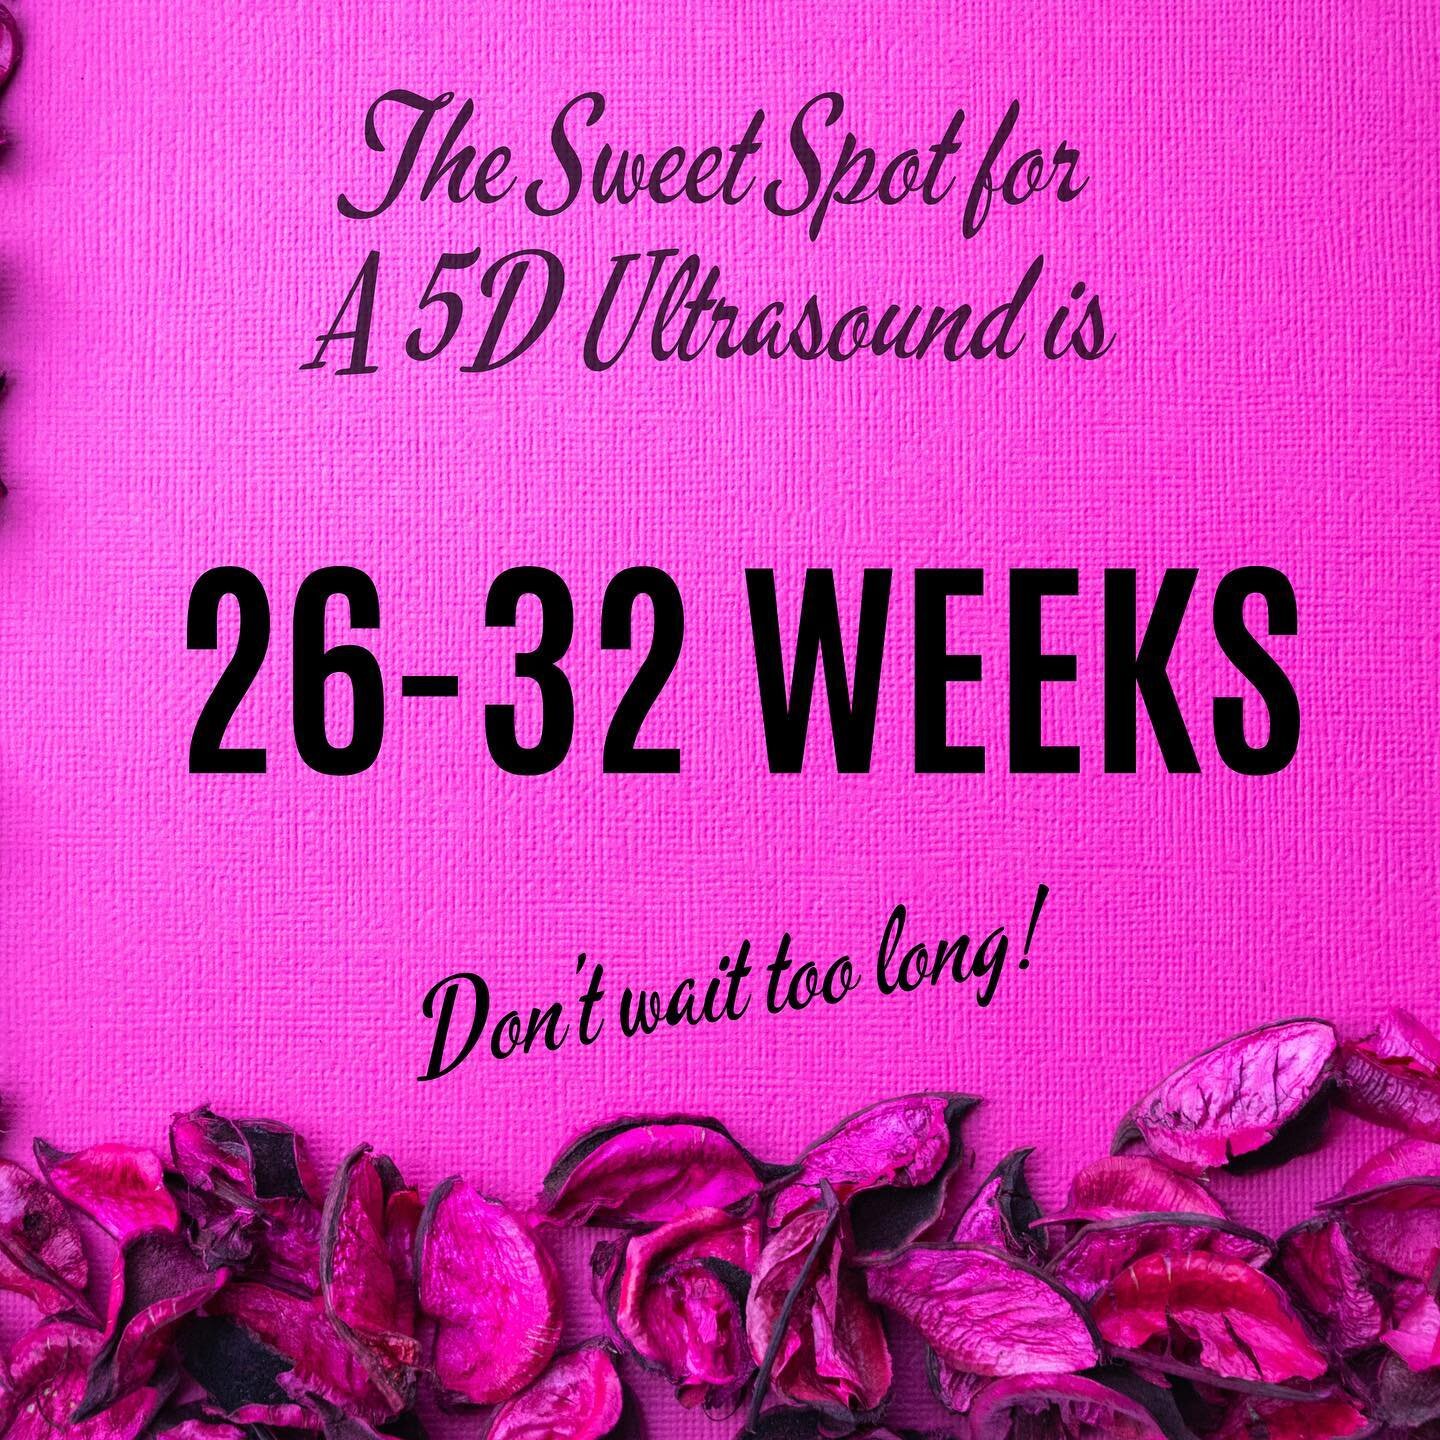 We&rsquo;ve had a lot of moms coming in after the 34 week mark! Don&rsquo;t wait that long mama! Get in her ASAP! &hearts;️

#3dultrasound #4dultrasound #5dultrasound #genderdetermination #3dultrasound #genderreveal #genderrevealideas #genderrevealpa